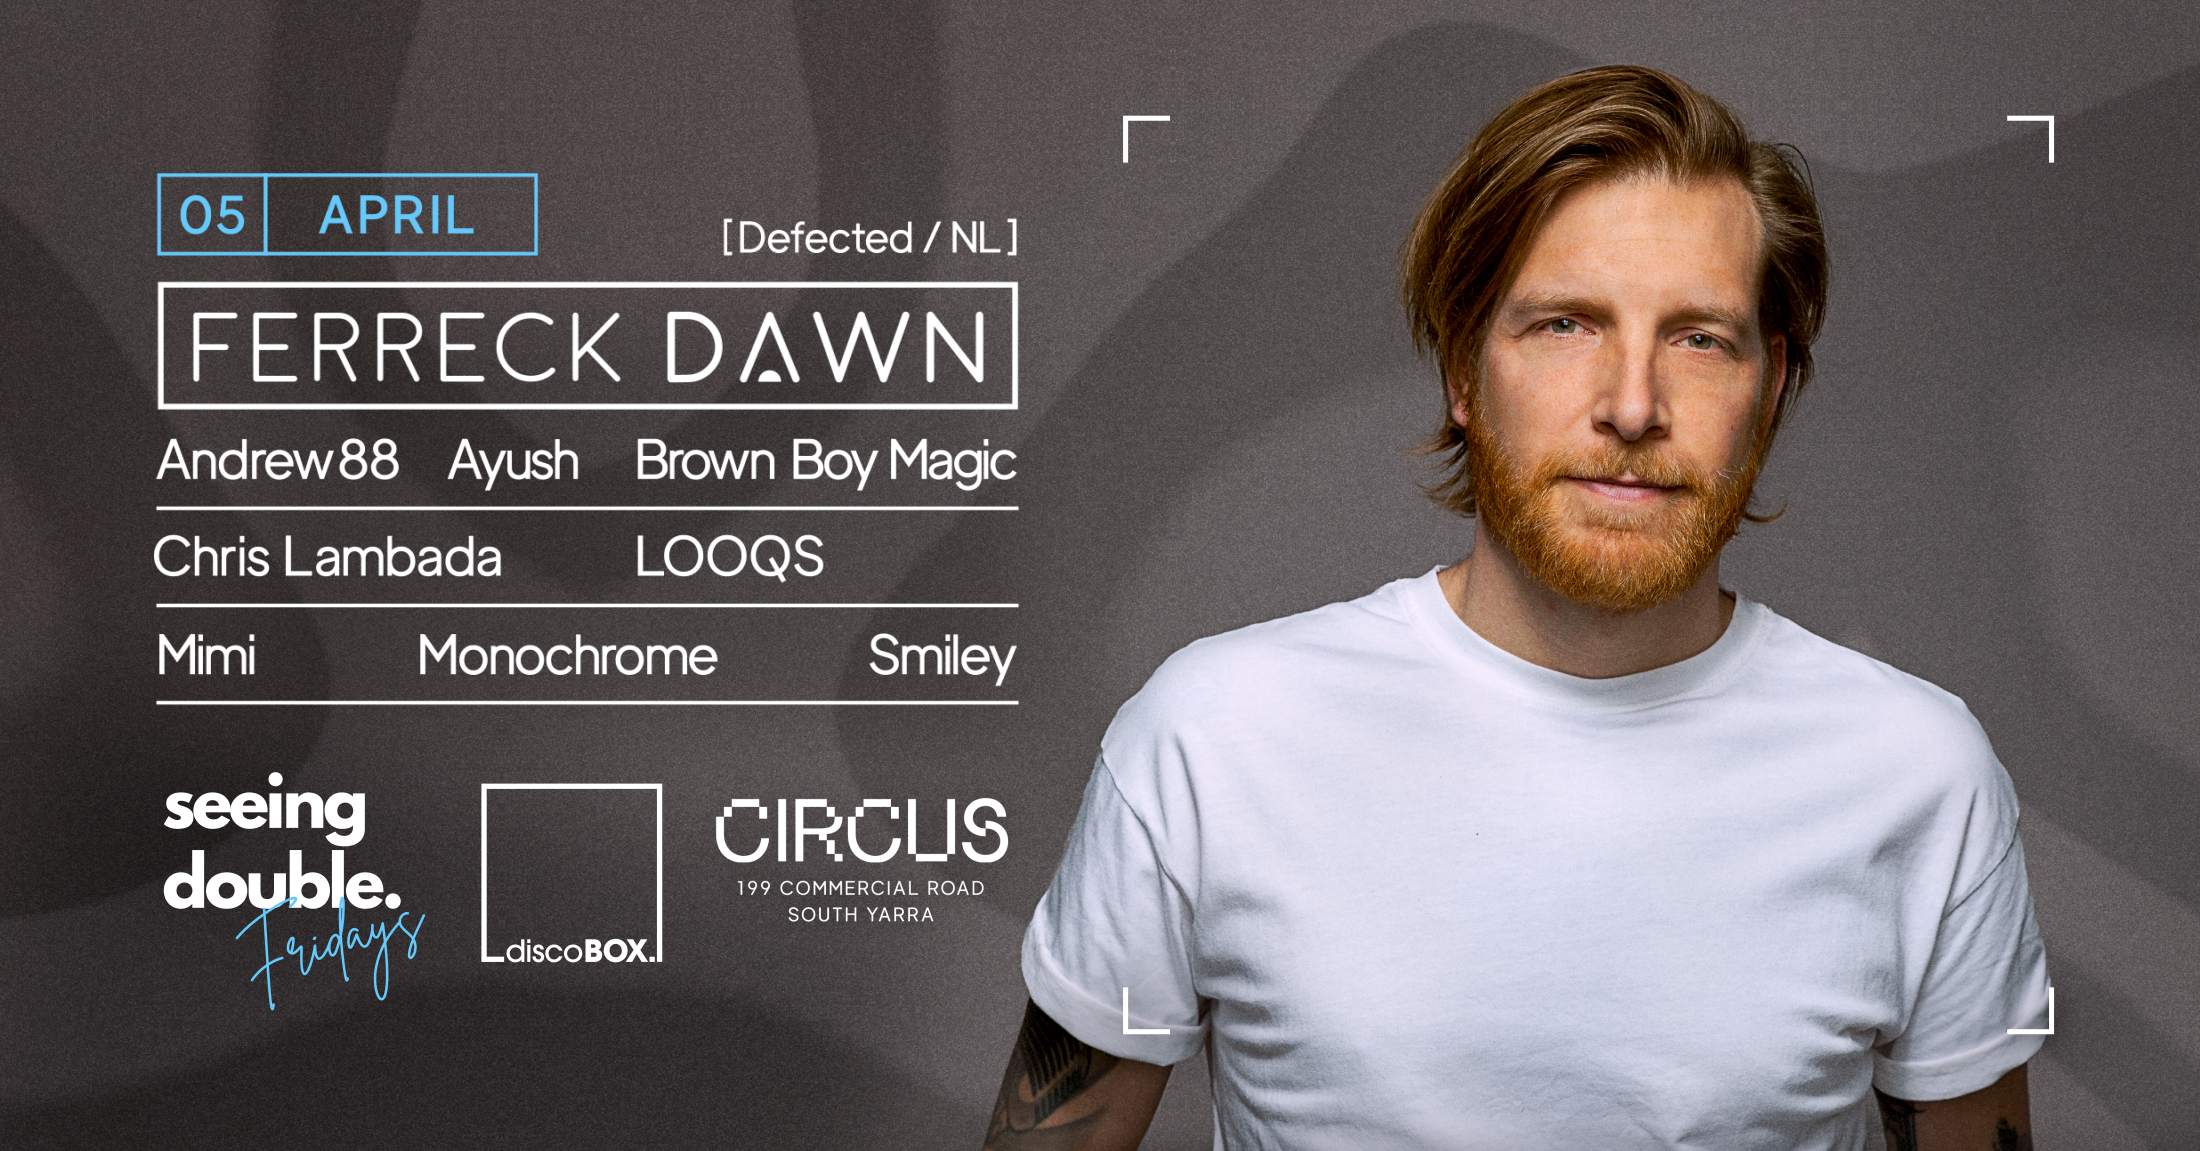 Ferreck Dawn (Defected/NL) at Circus - Seeing Double & discoBOX - Página frontal